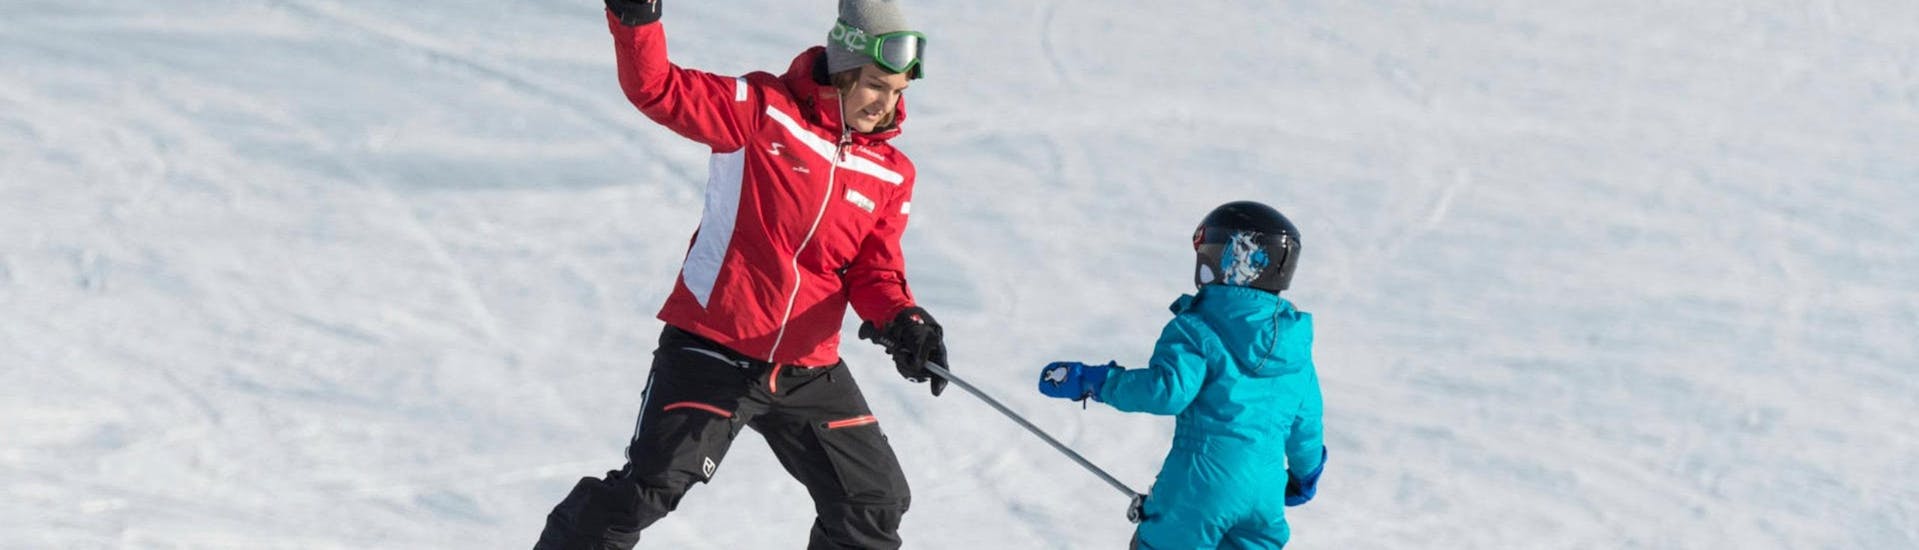 A ski instructor fom Skischule Schwarzenberg am Bödele is practicing some basic skiing techniques with a young child during their private ski lessons for kids from 3.5 y.	